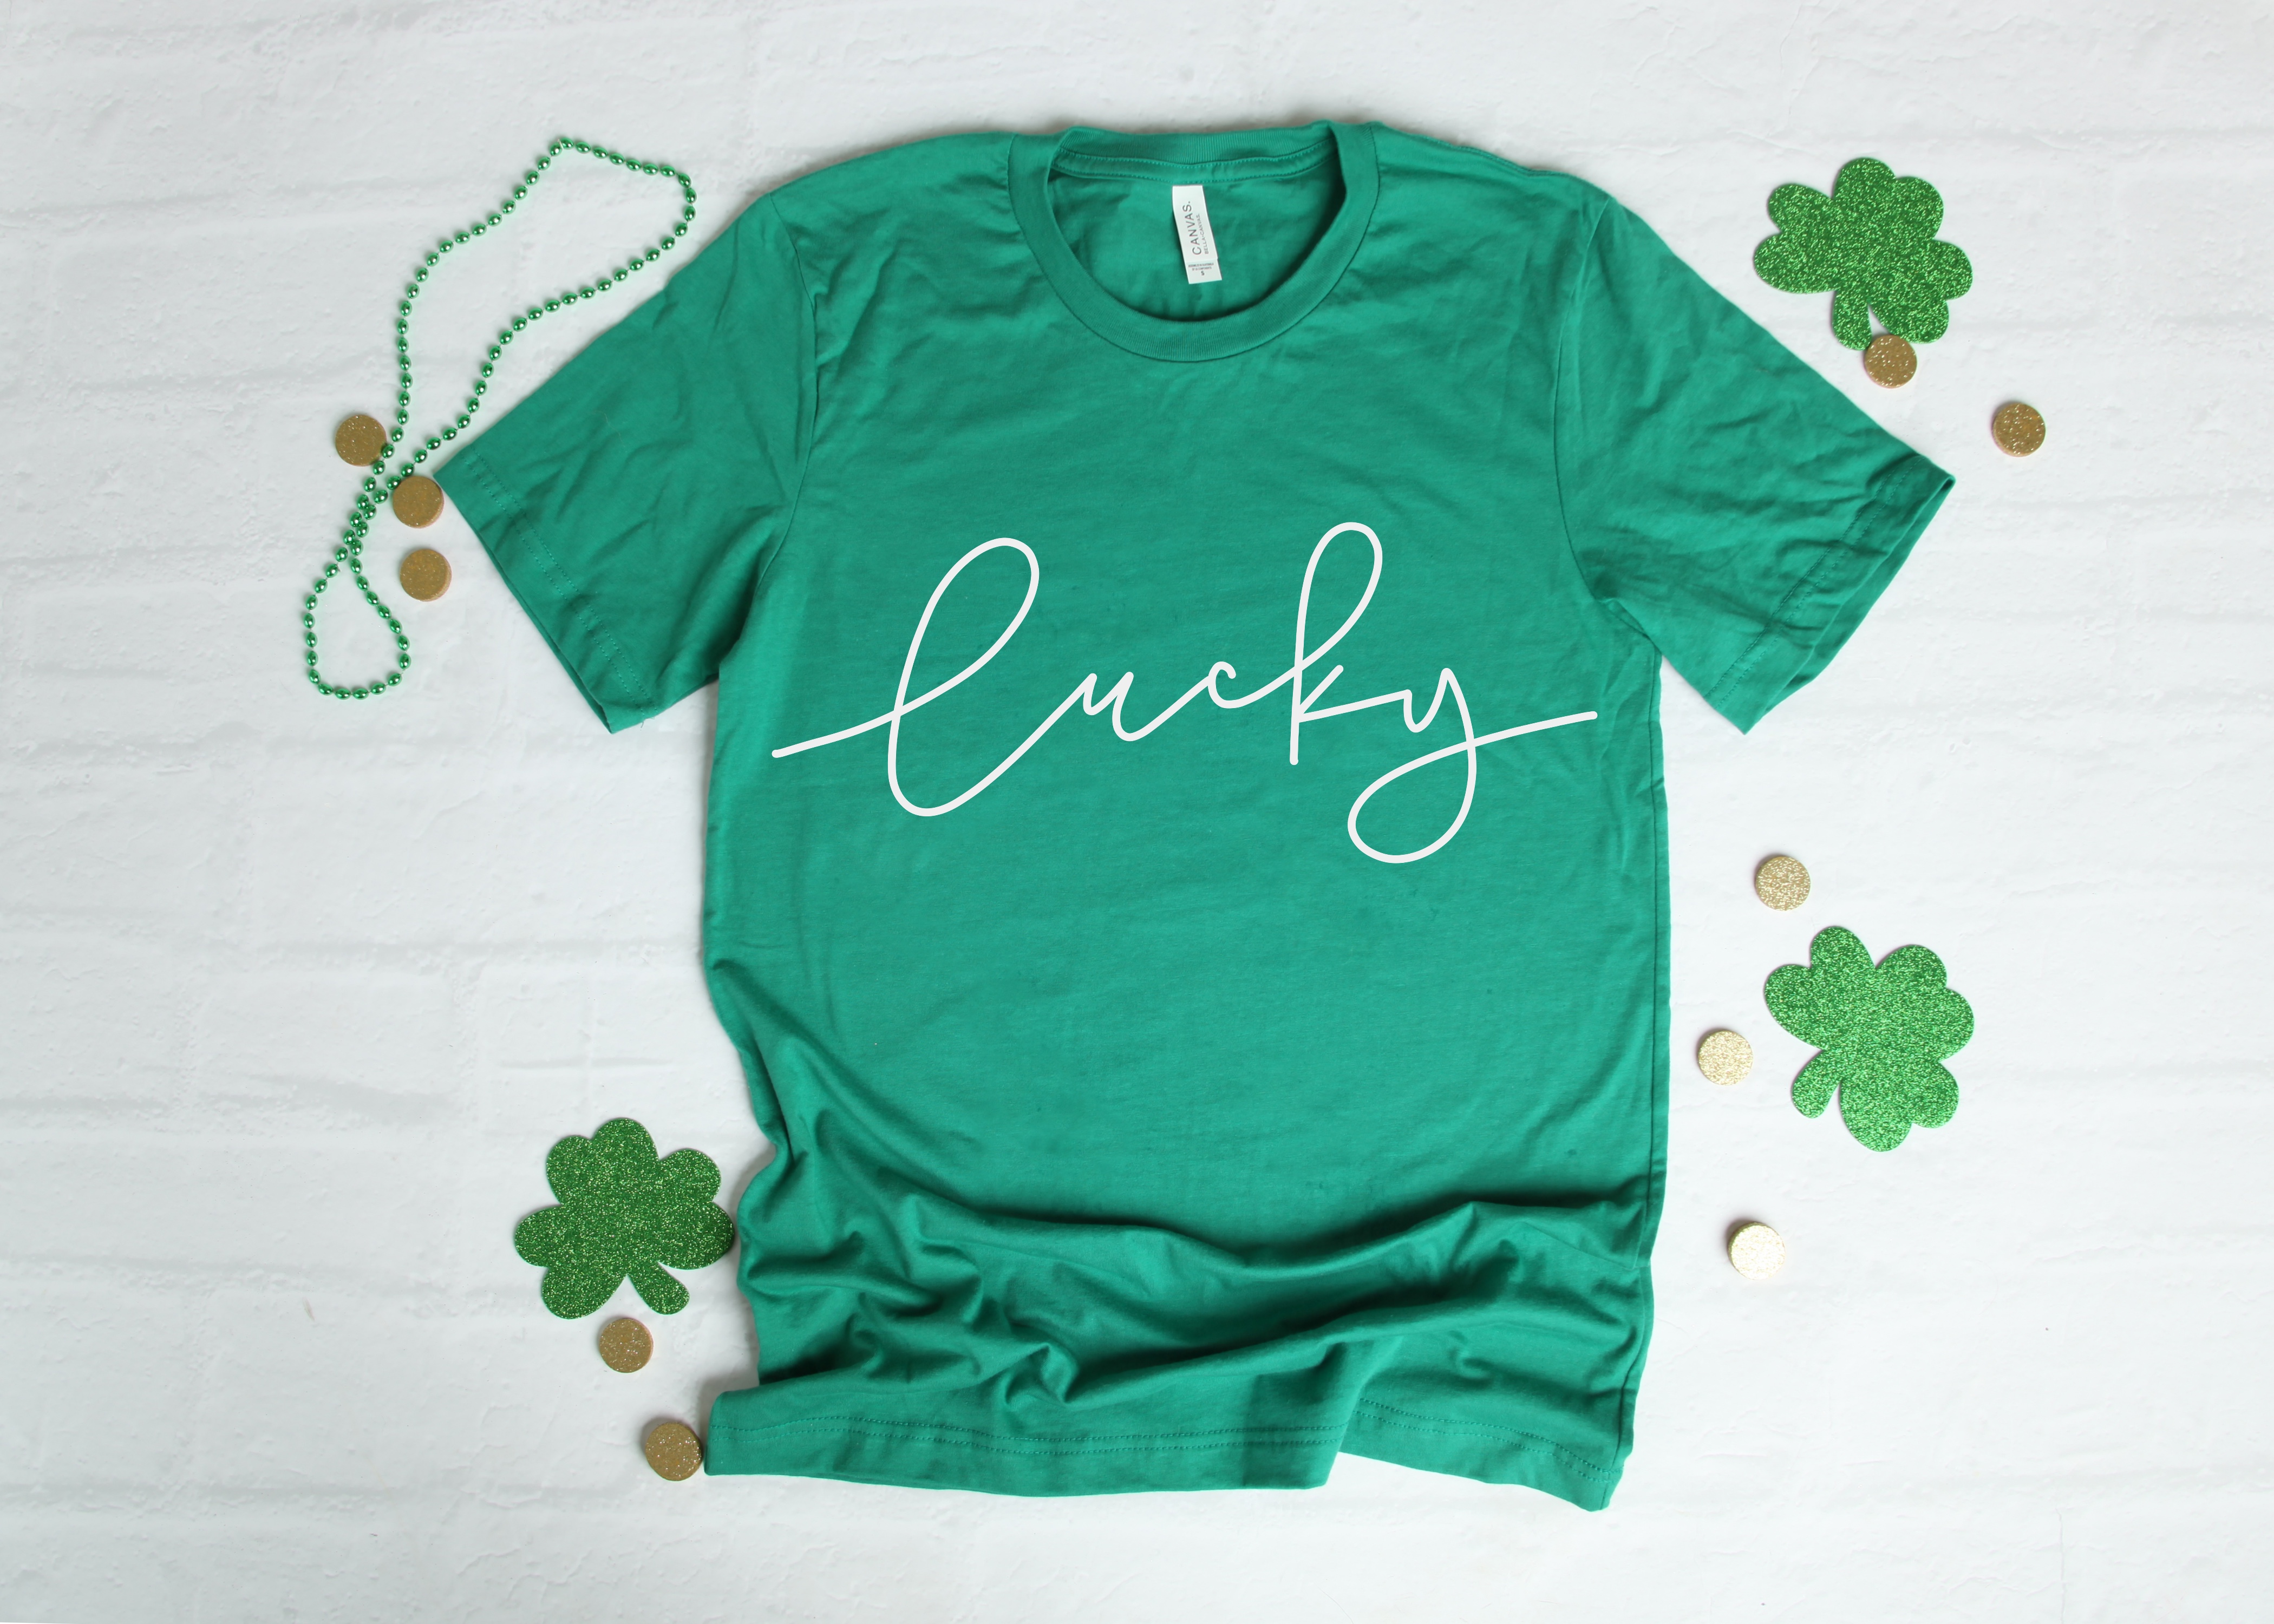 Green shirt with the phrase "Lucky" in white